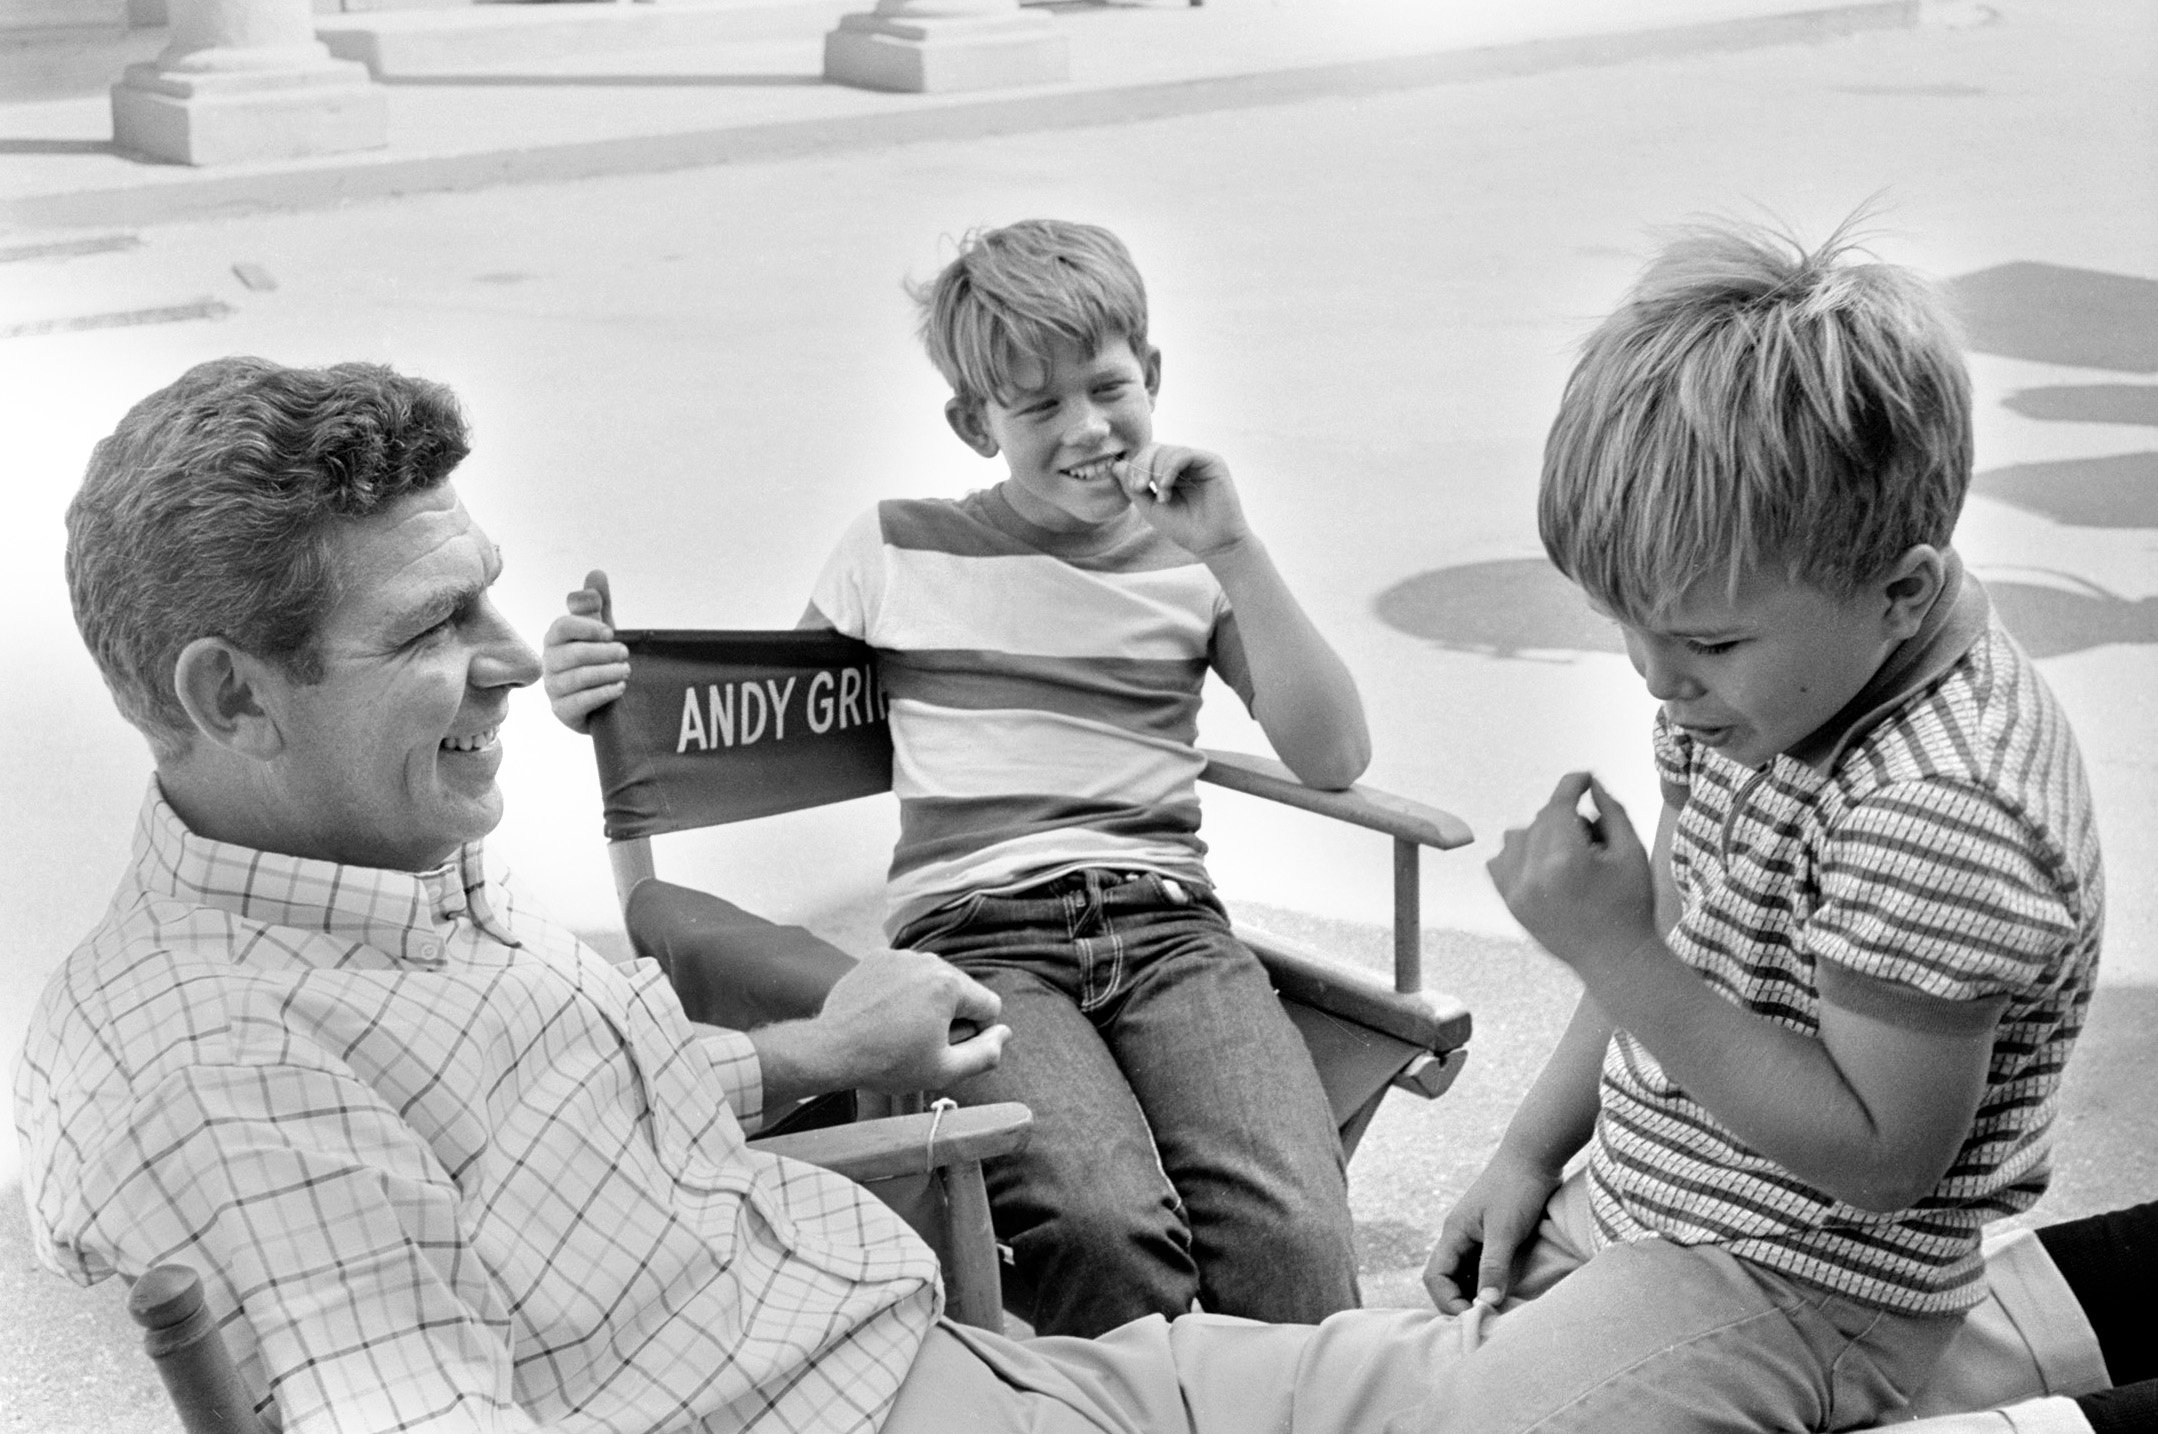 Actors Andy Griffith, Ron Howard, and Clint Howard on the 'Andy Griffith Show' set